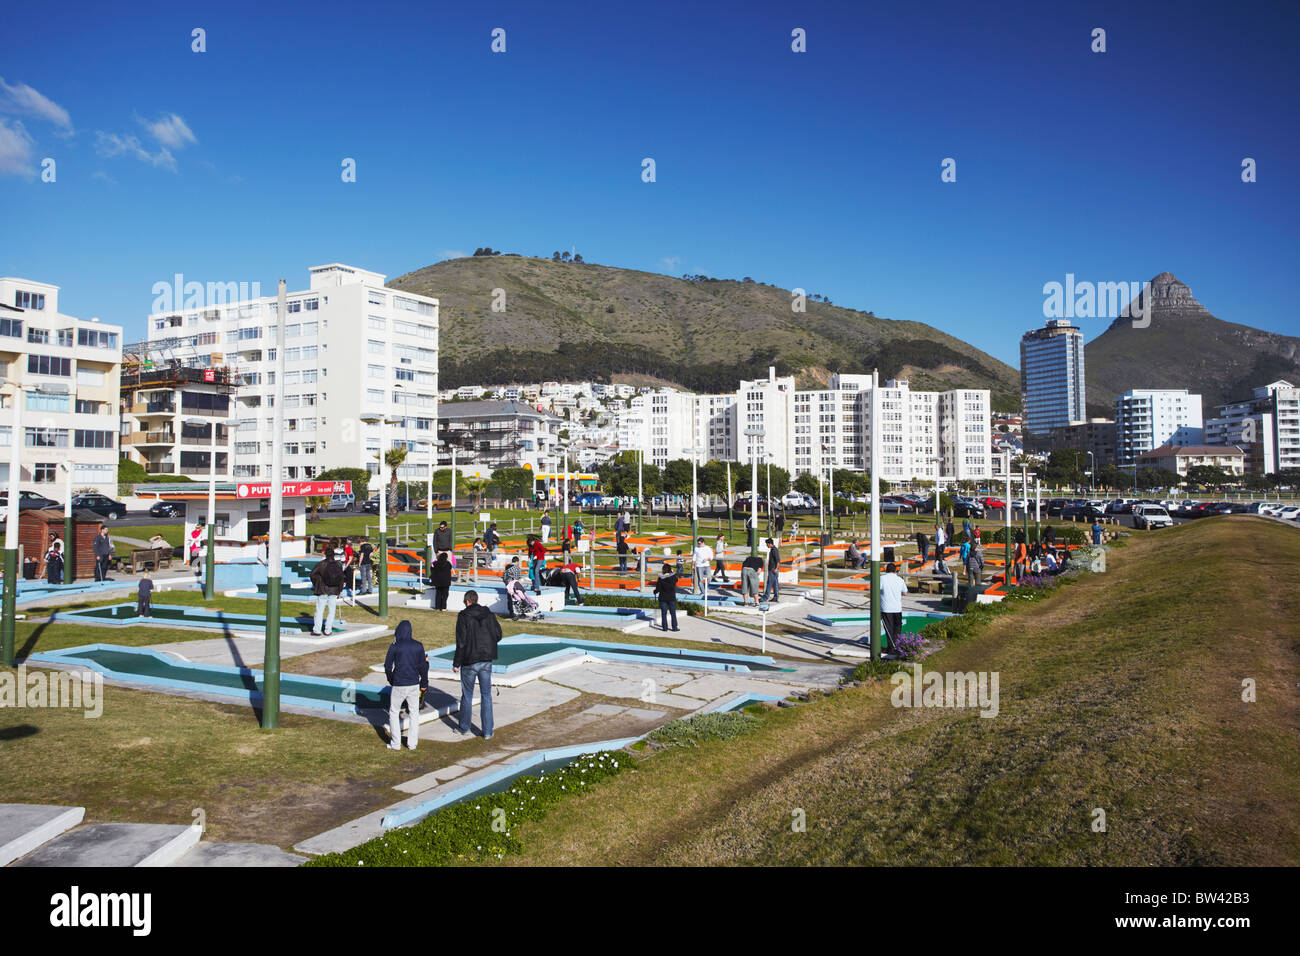 People playing miniature golf, Green Point, Cape Town, Western Cape, South Africa Stock Photo